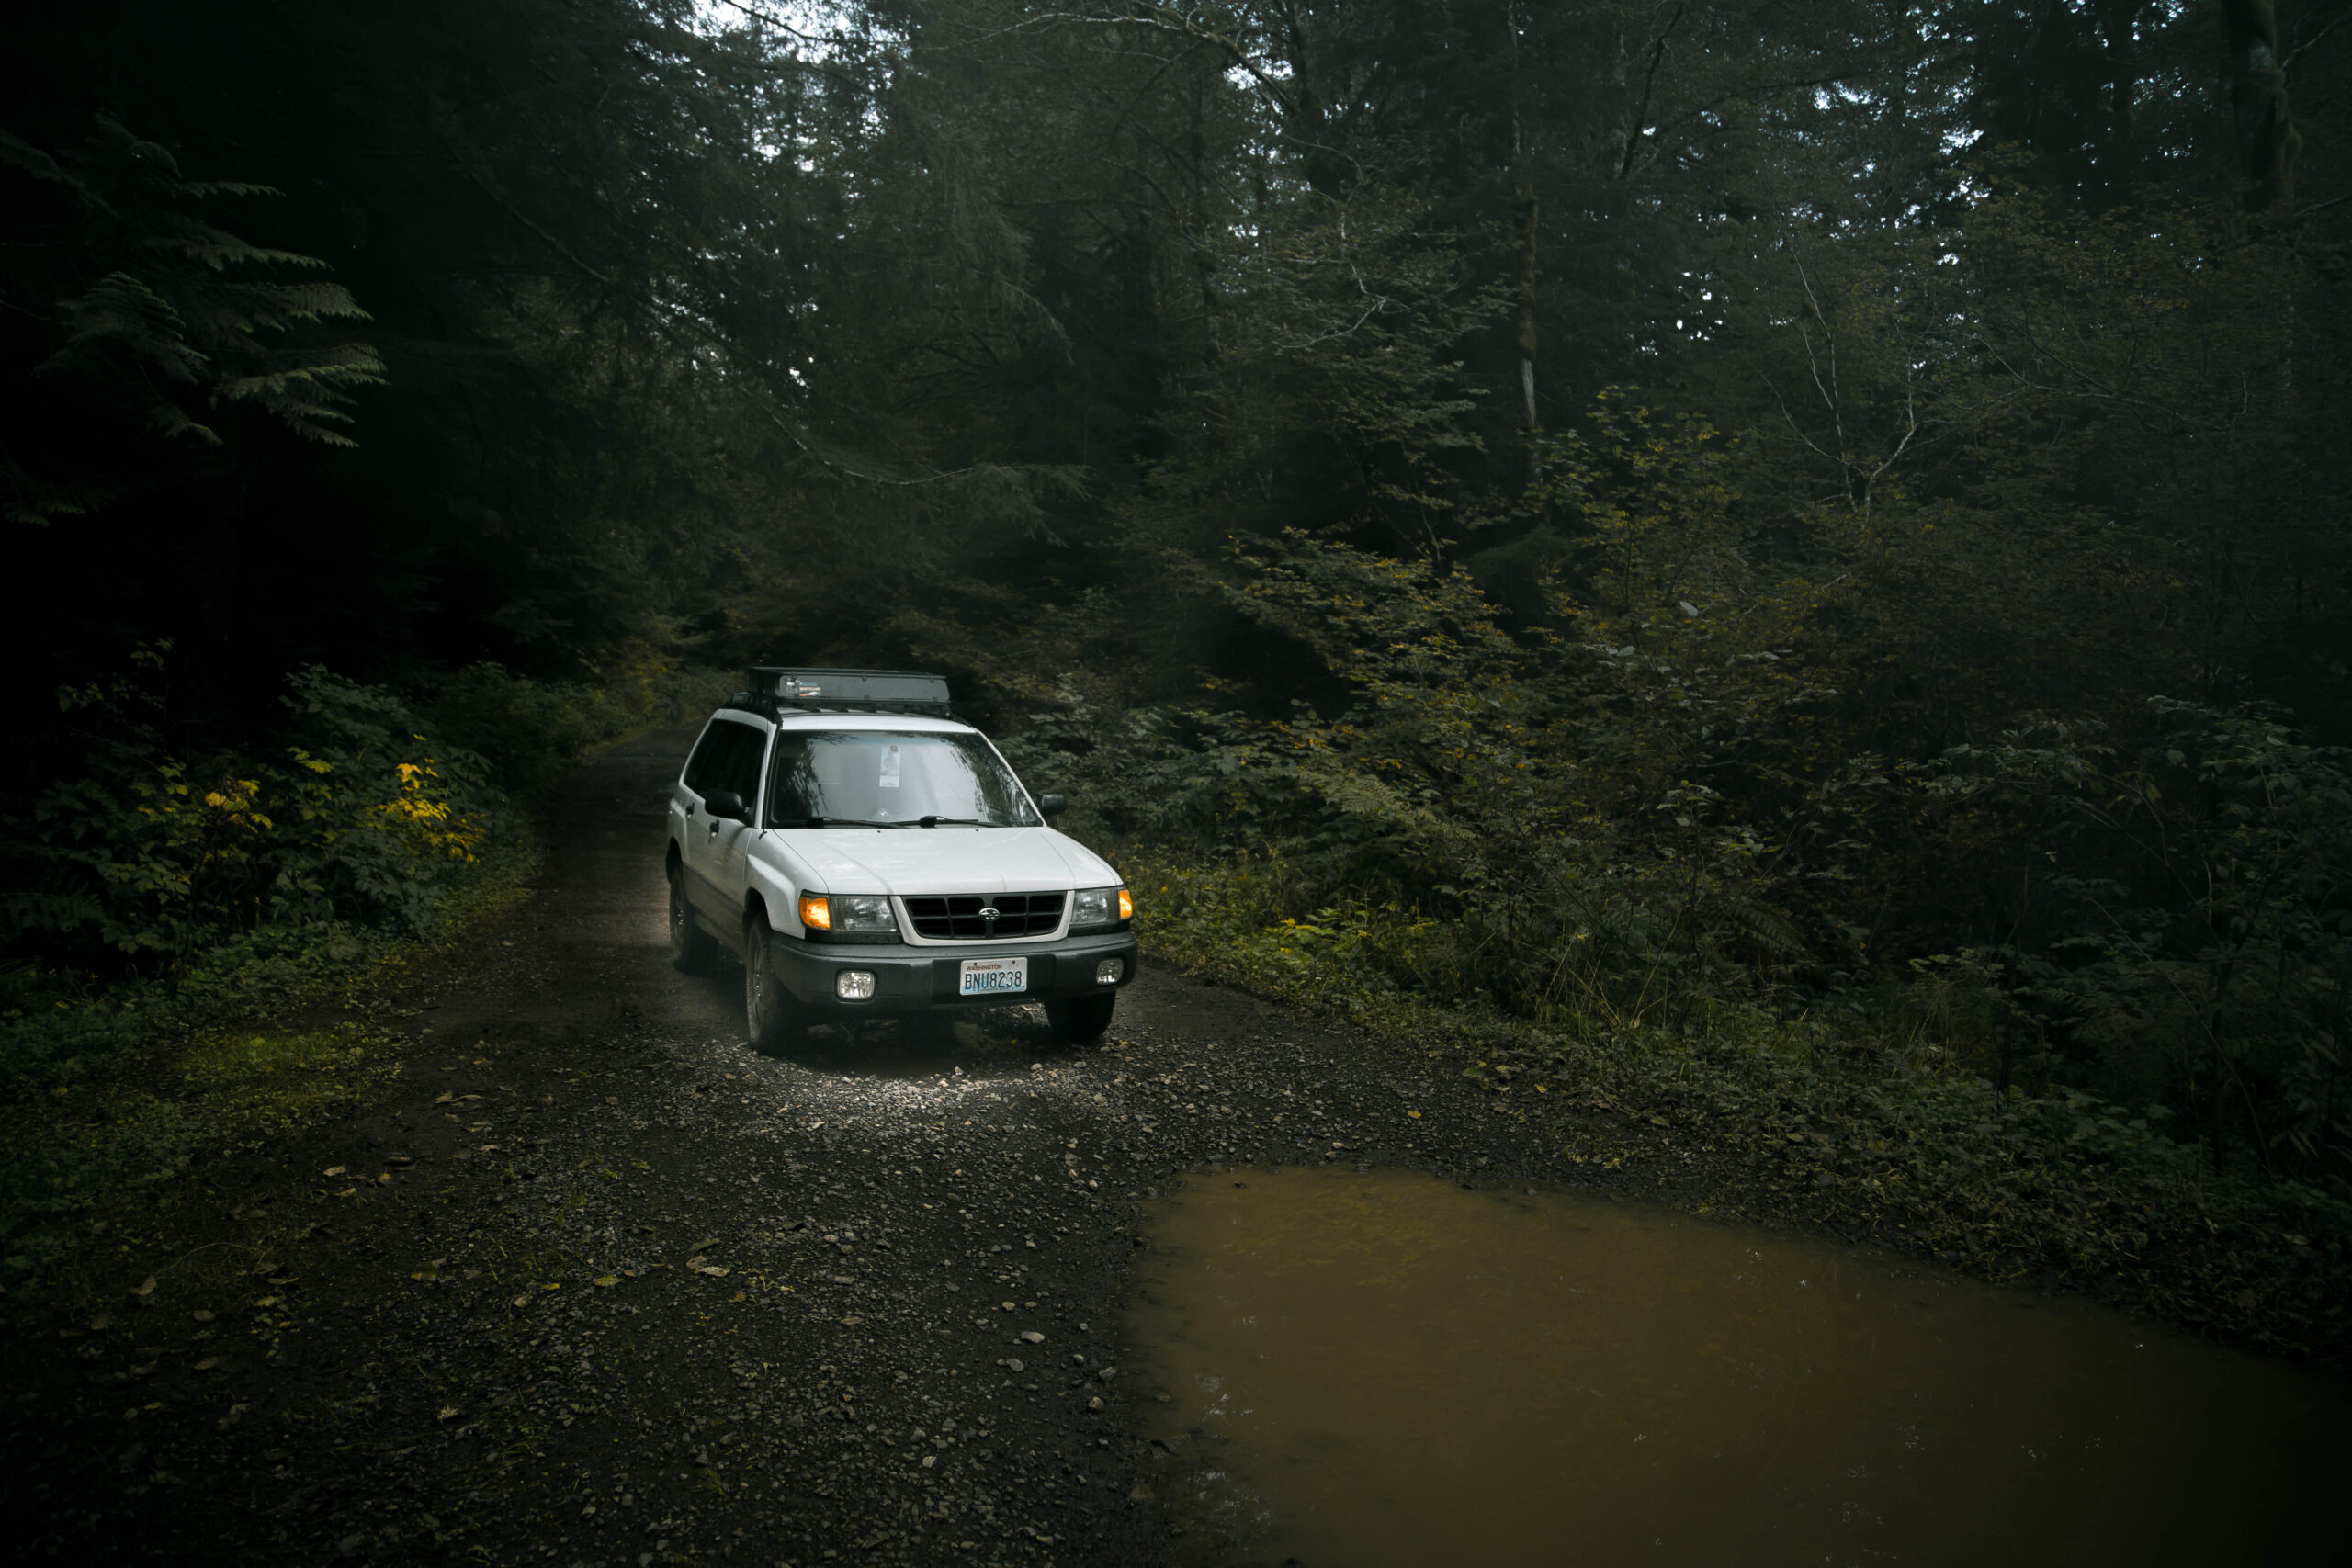 Subaru Forester with a lift kit and all terrain tires for overlanding